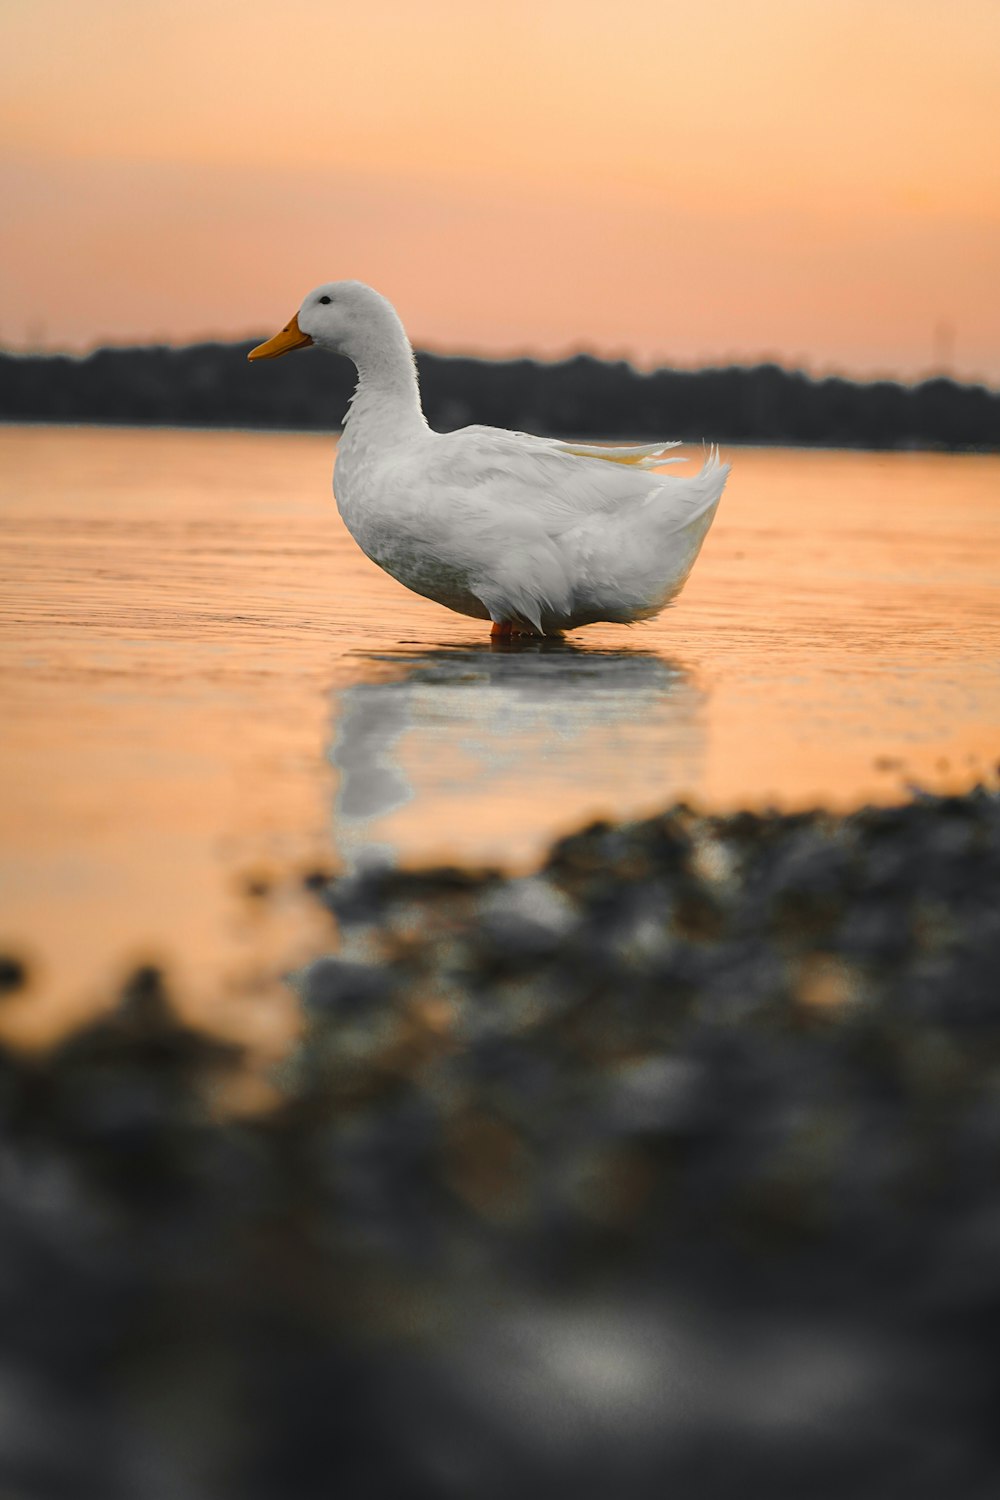 white duck on water during daytime